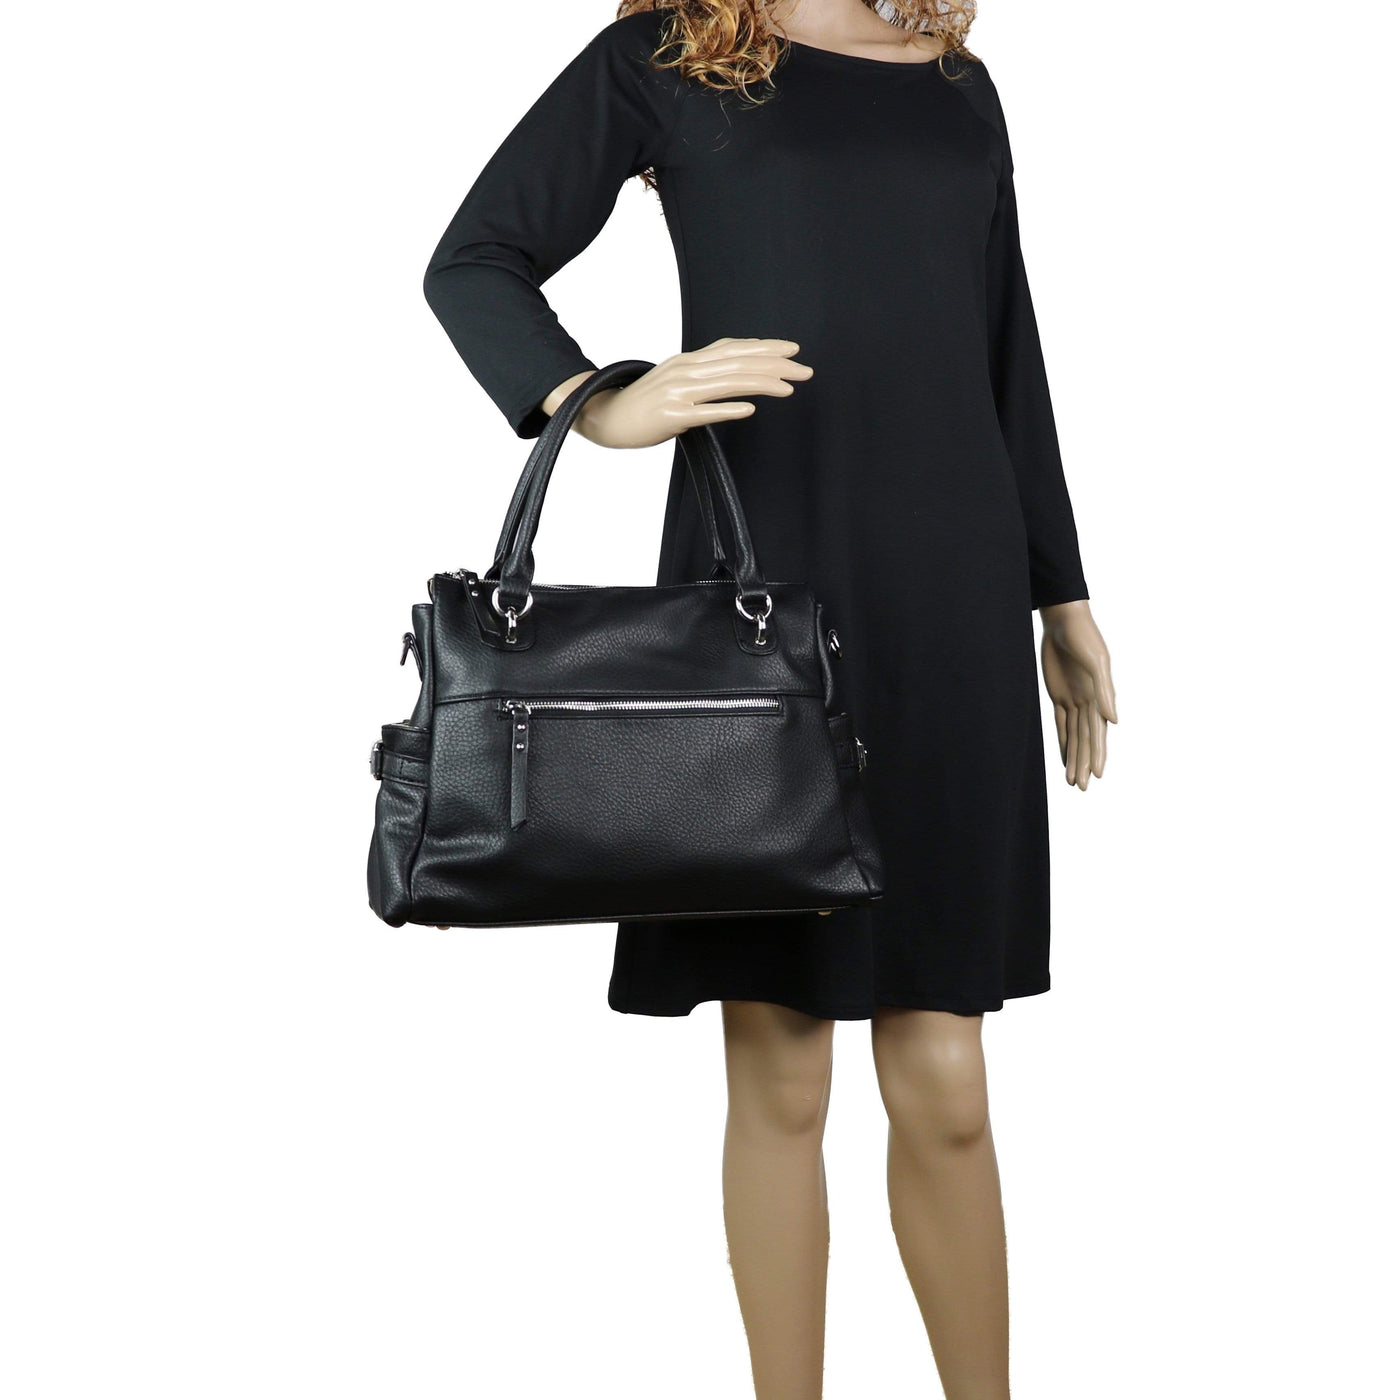 Concealed Carry Jessica Satchel Black by Lady Conceal